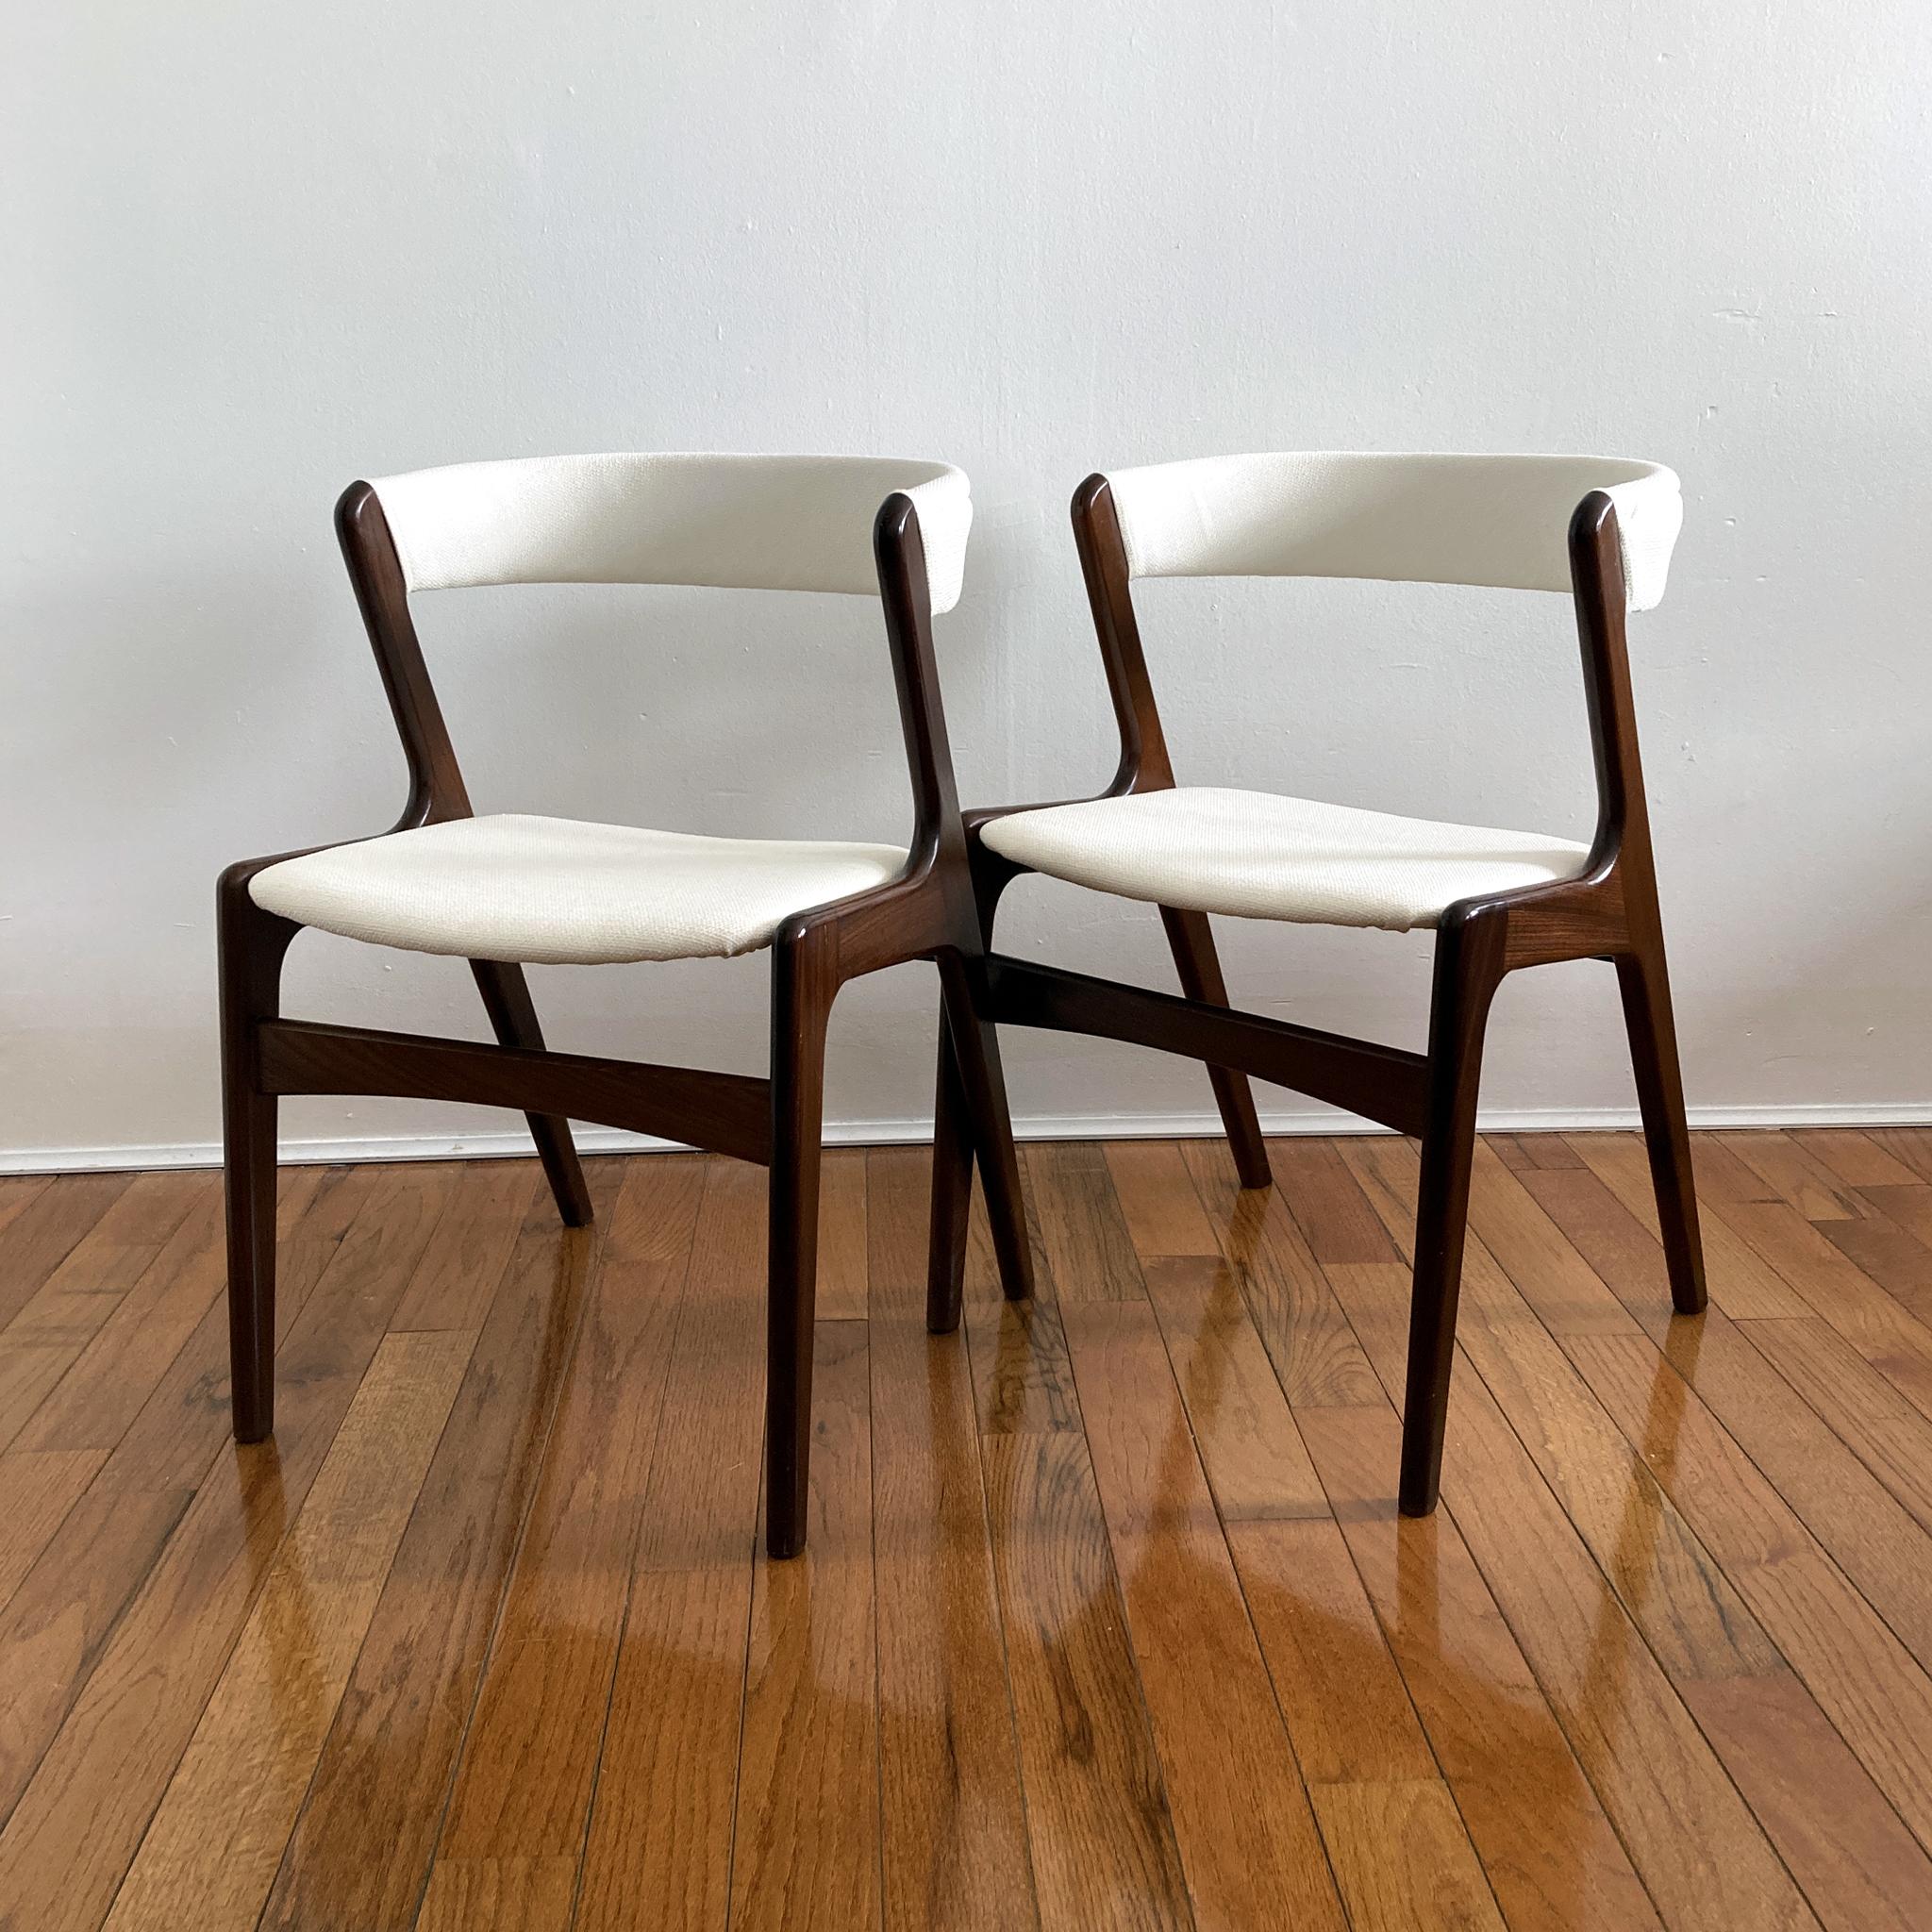 Kai Kristiansen Ivory Tweed Curved Back Teak Chairs, Danish, 1960s, Pair of Two In Good Condition For Sale In New York, NY